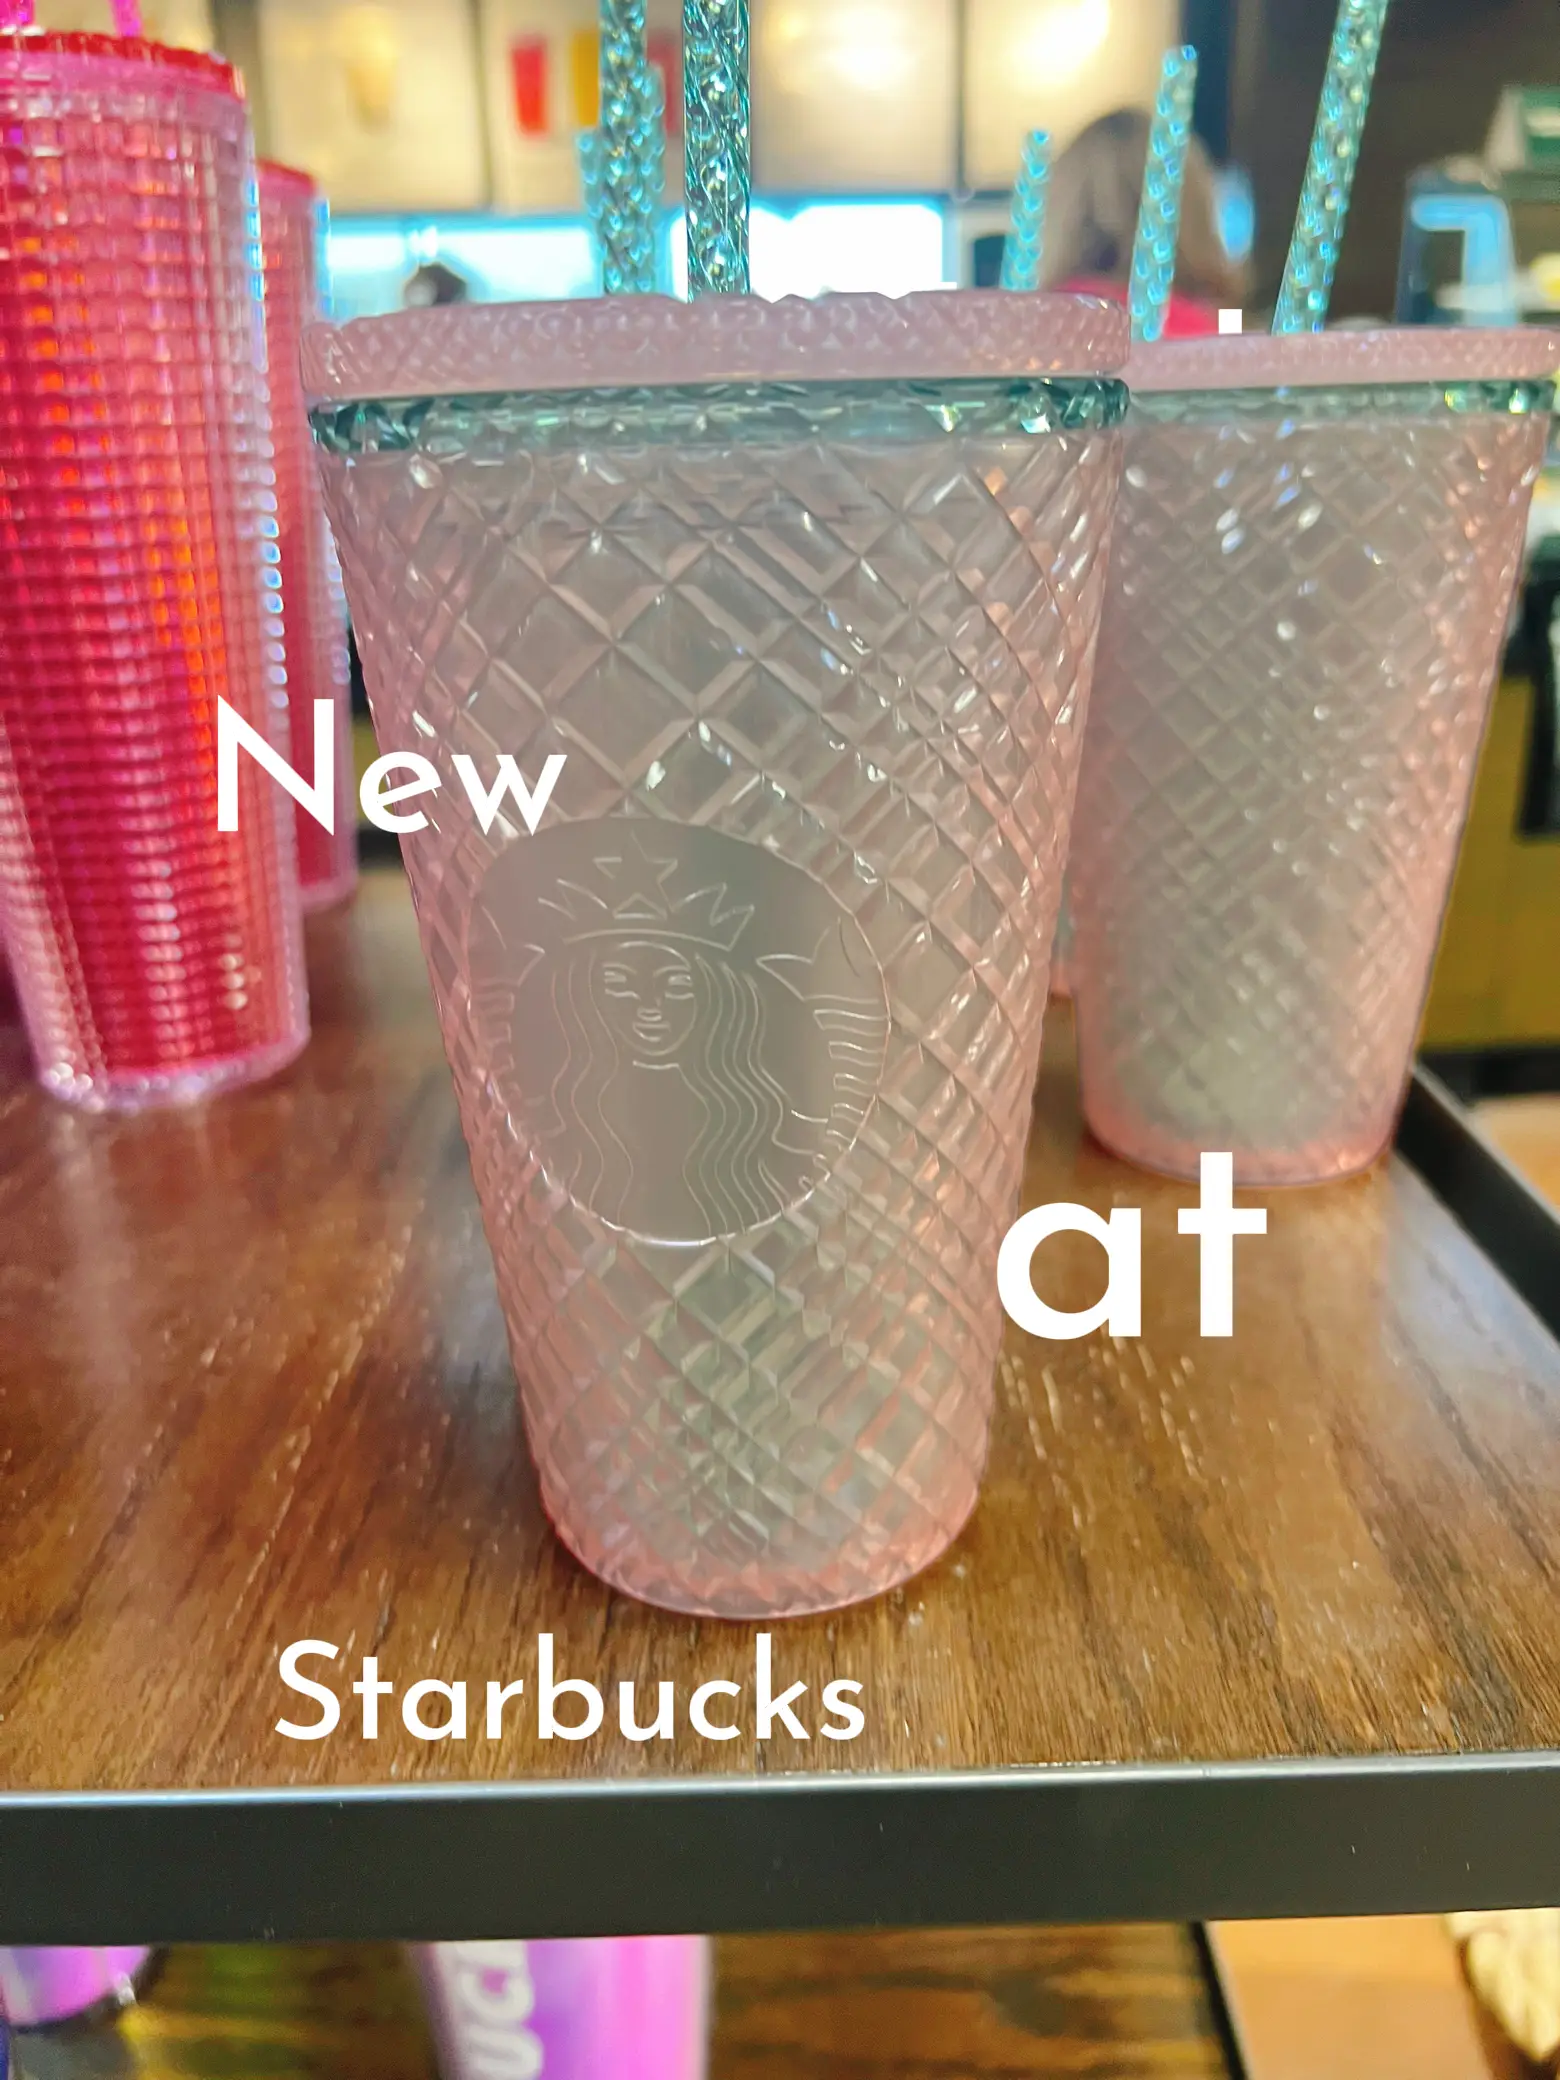 im obsessed with this cup, Starbucks Glass Cup